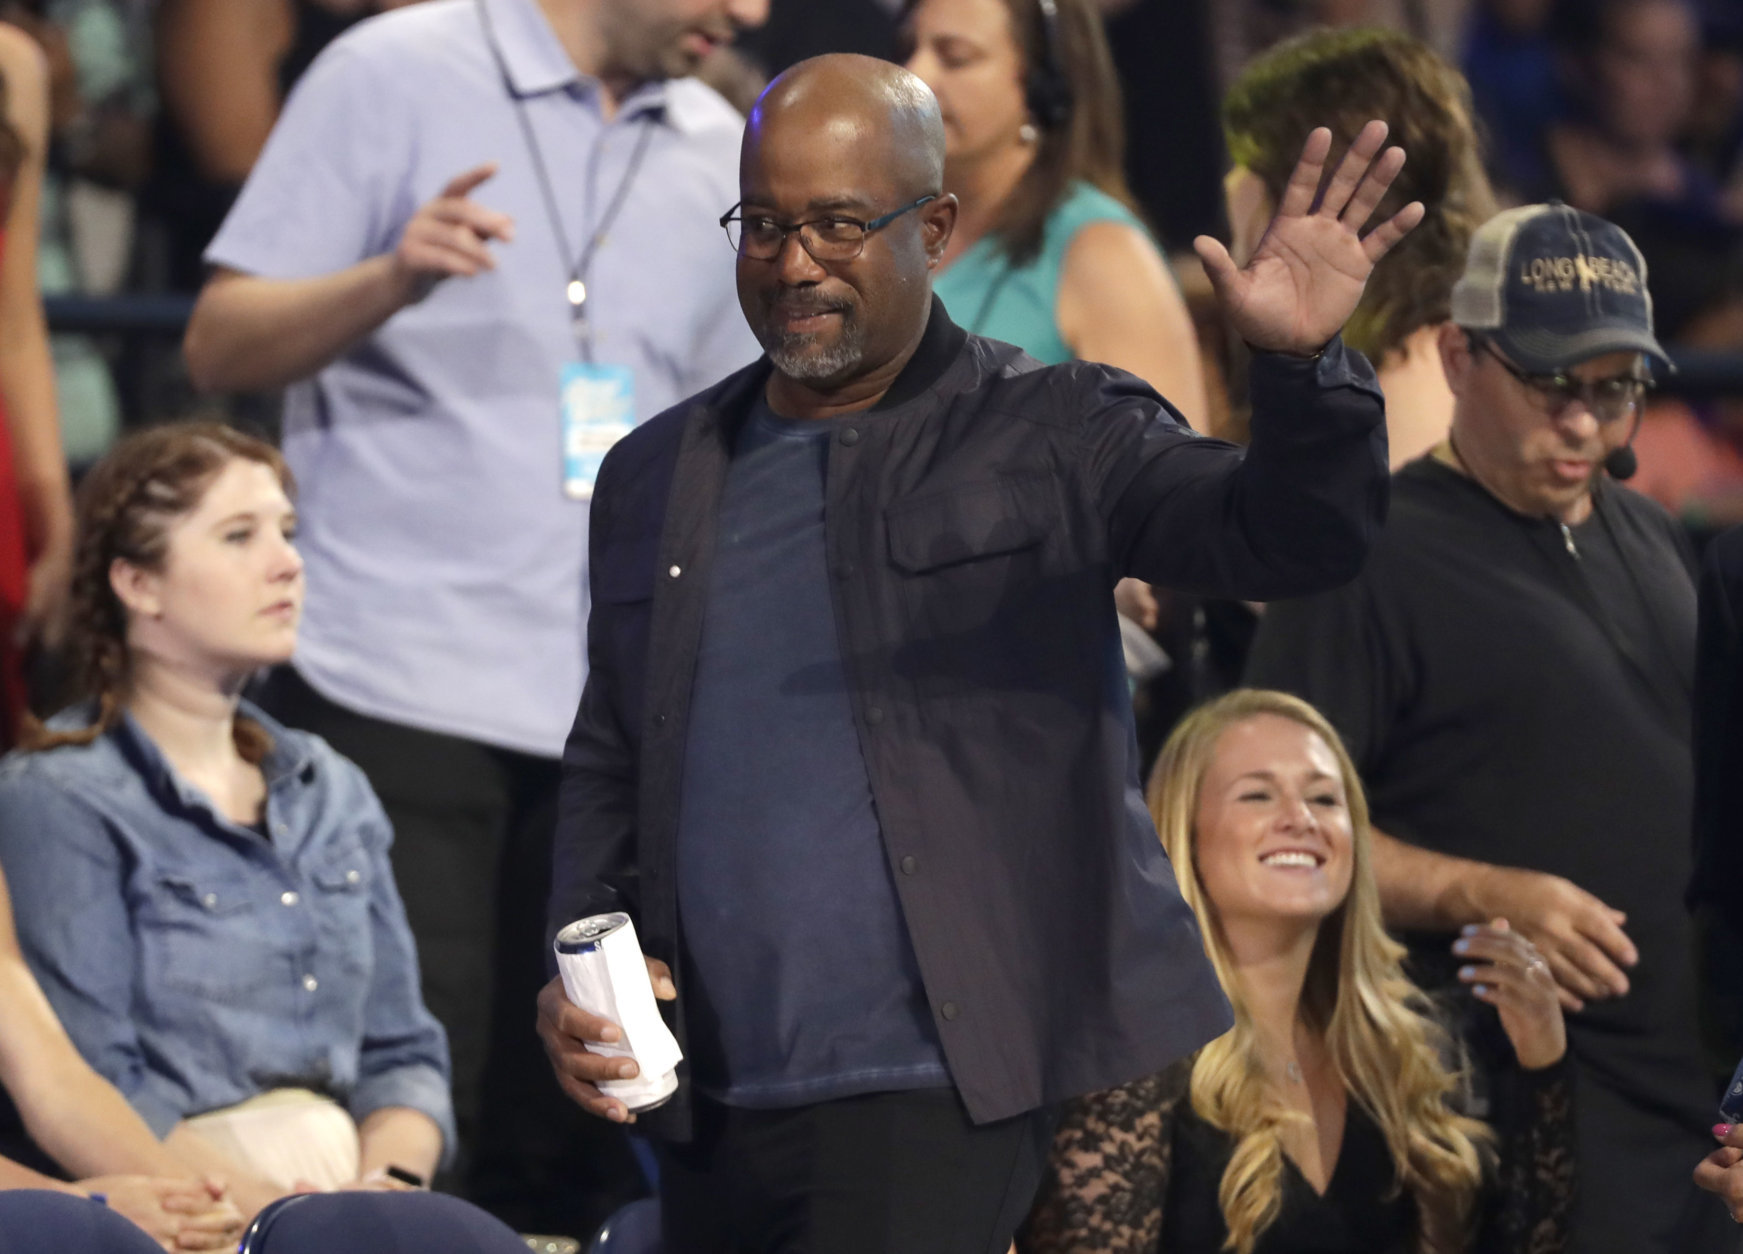 Darius Rucker appears in the audience at the CMT Music Awards at the Bridgestone Arena on Wednesday, June 6, 2018, in Nashville, Tenn. (AP Photo/Mark Humphrey)